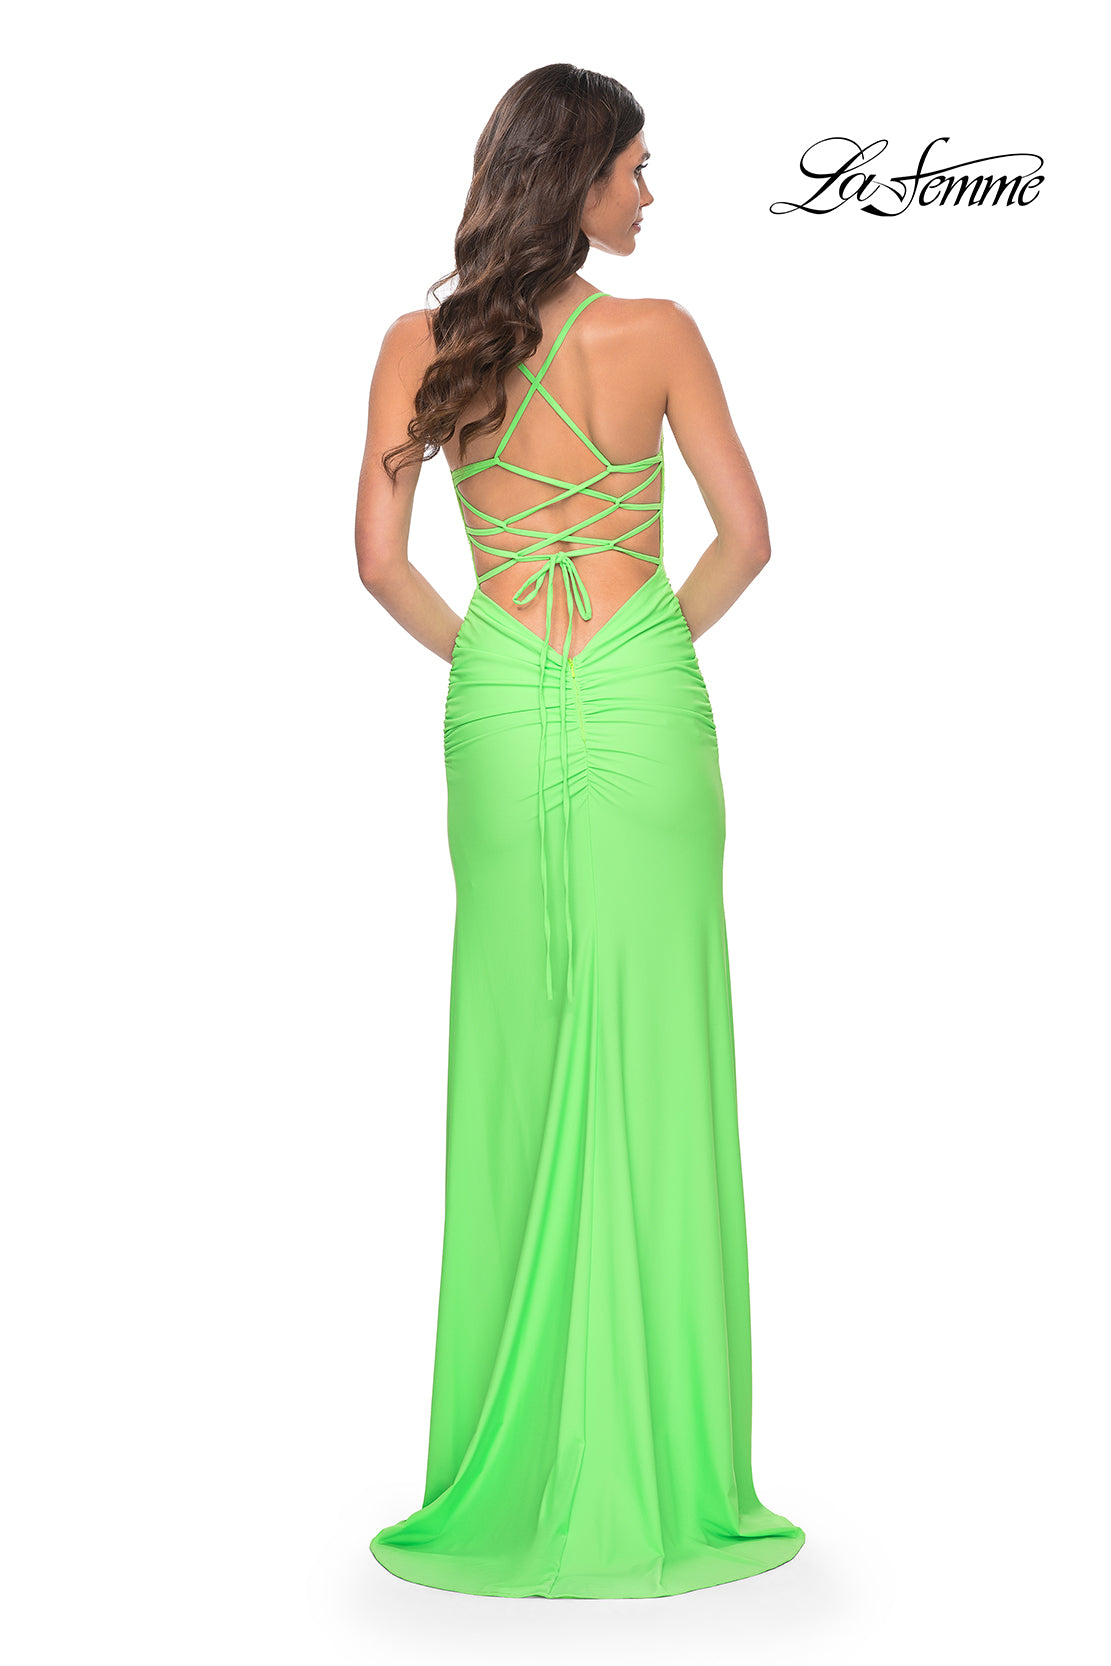 La Femme 31988 Rhinestone Embellished Lace Bodice Prom Gown - A glamorous long dress featuring a ruched jersey skirt, high slit, rhinestone embellished lace bodice with exposed boning, lace-up back, and ruching along the zipper for a perfect fit.  The model is wearing the dress in bright green.